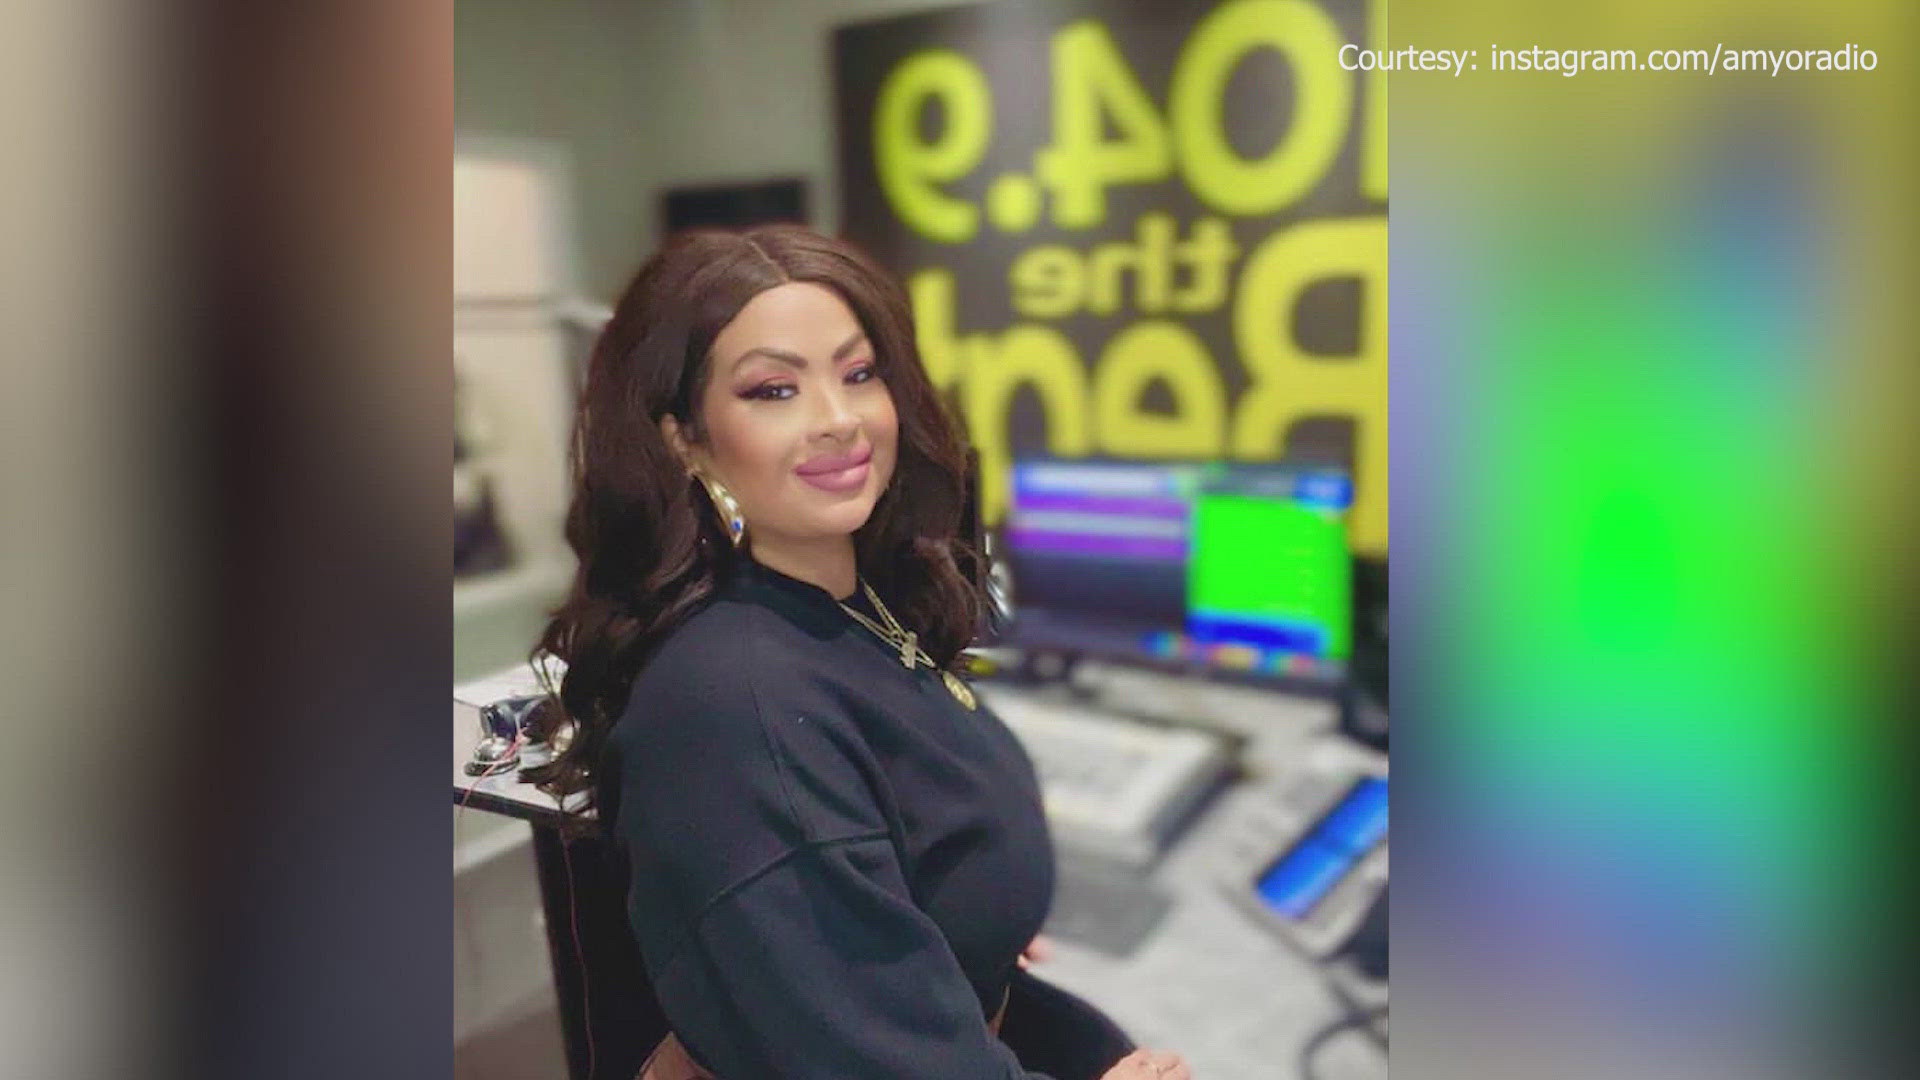 Medical examiners identified the victim as 44-year-old Amy Garza, a Lubbock radio show host known as "Amy-O" on 104.9 The Beat.